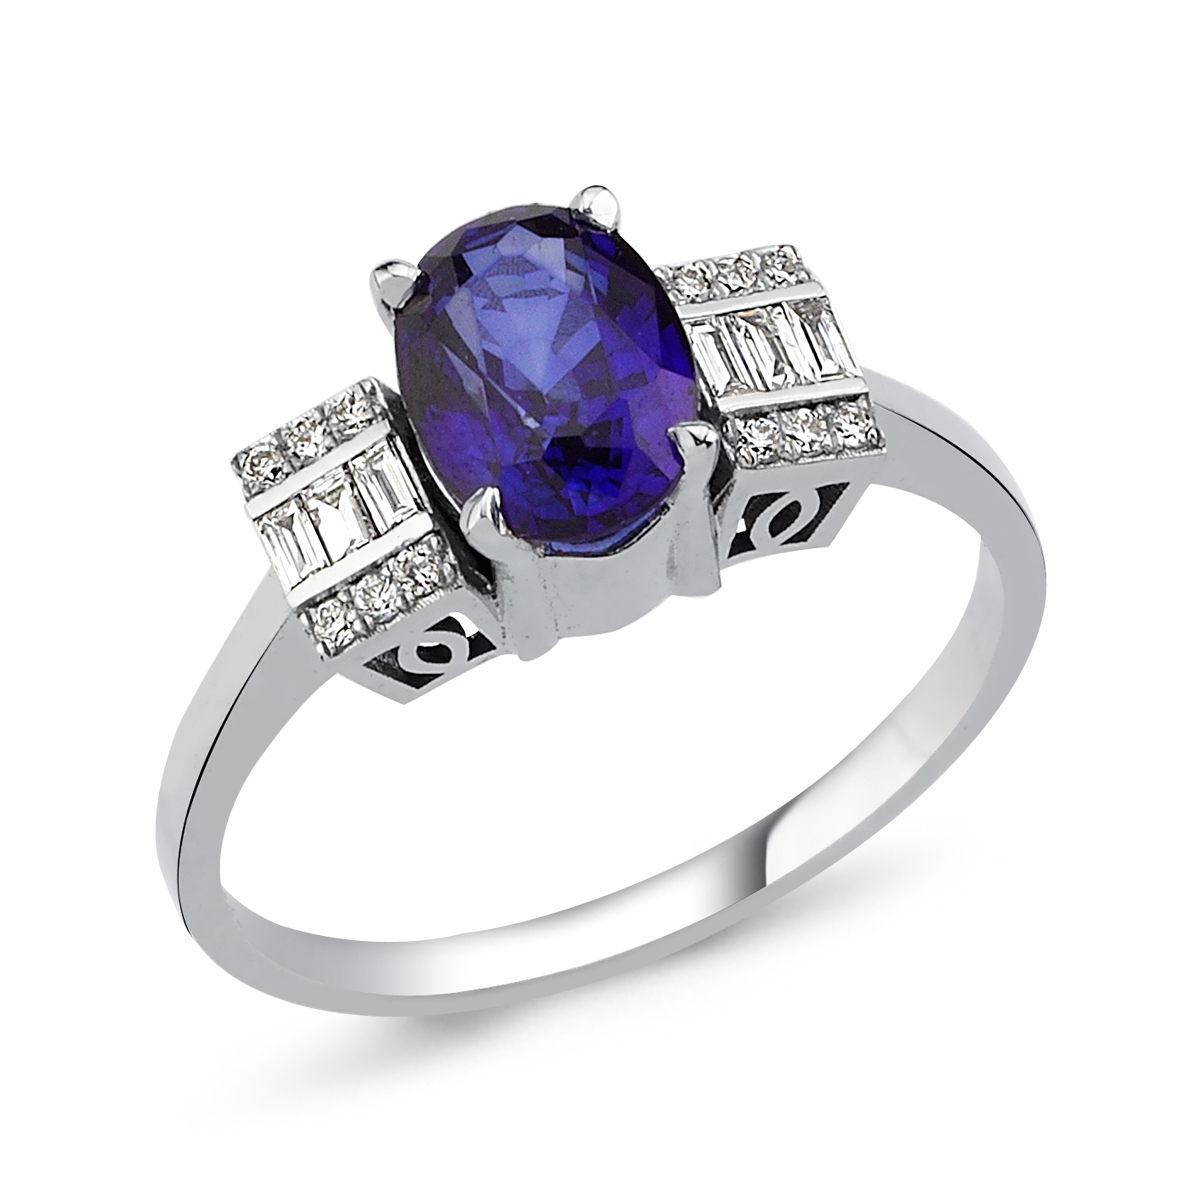 Baguette- Sapphire And Baguette Diamond Ring